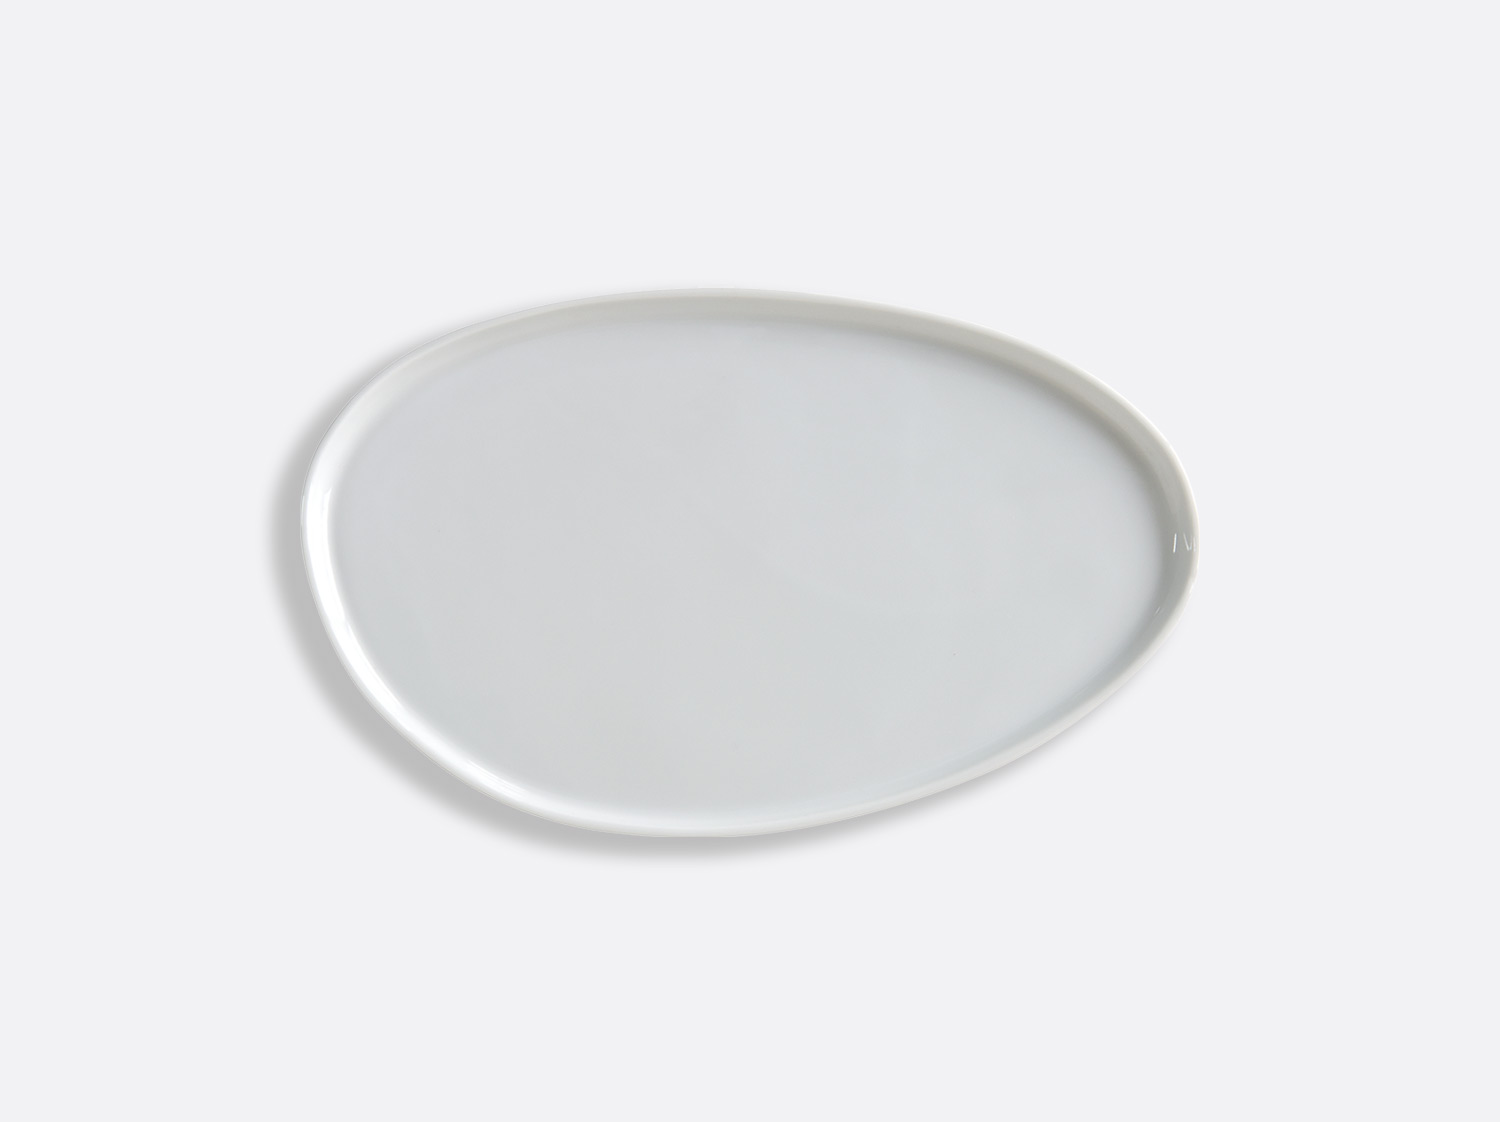 China Platter S3 white of the collection Ombres - Sarah-Linda Forrer | Bernardaud